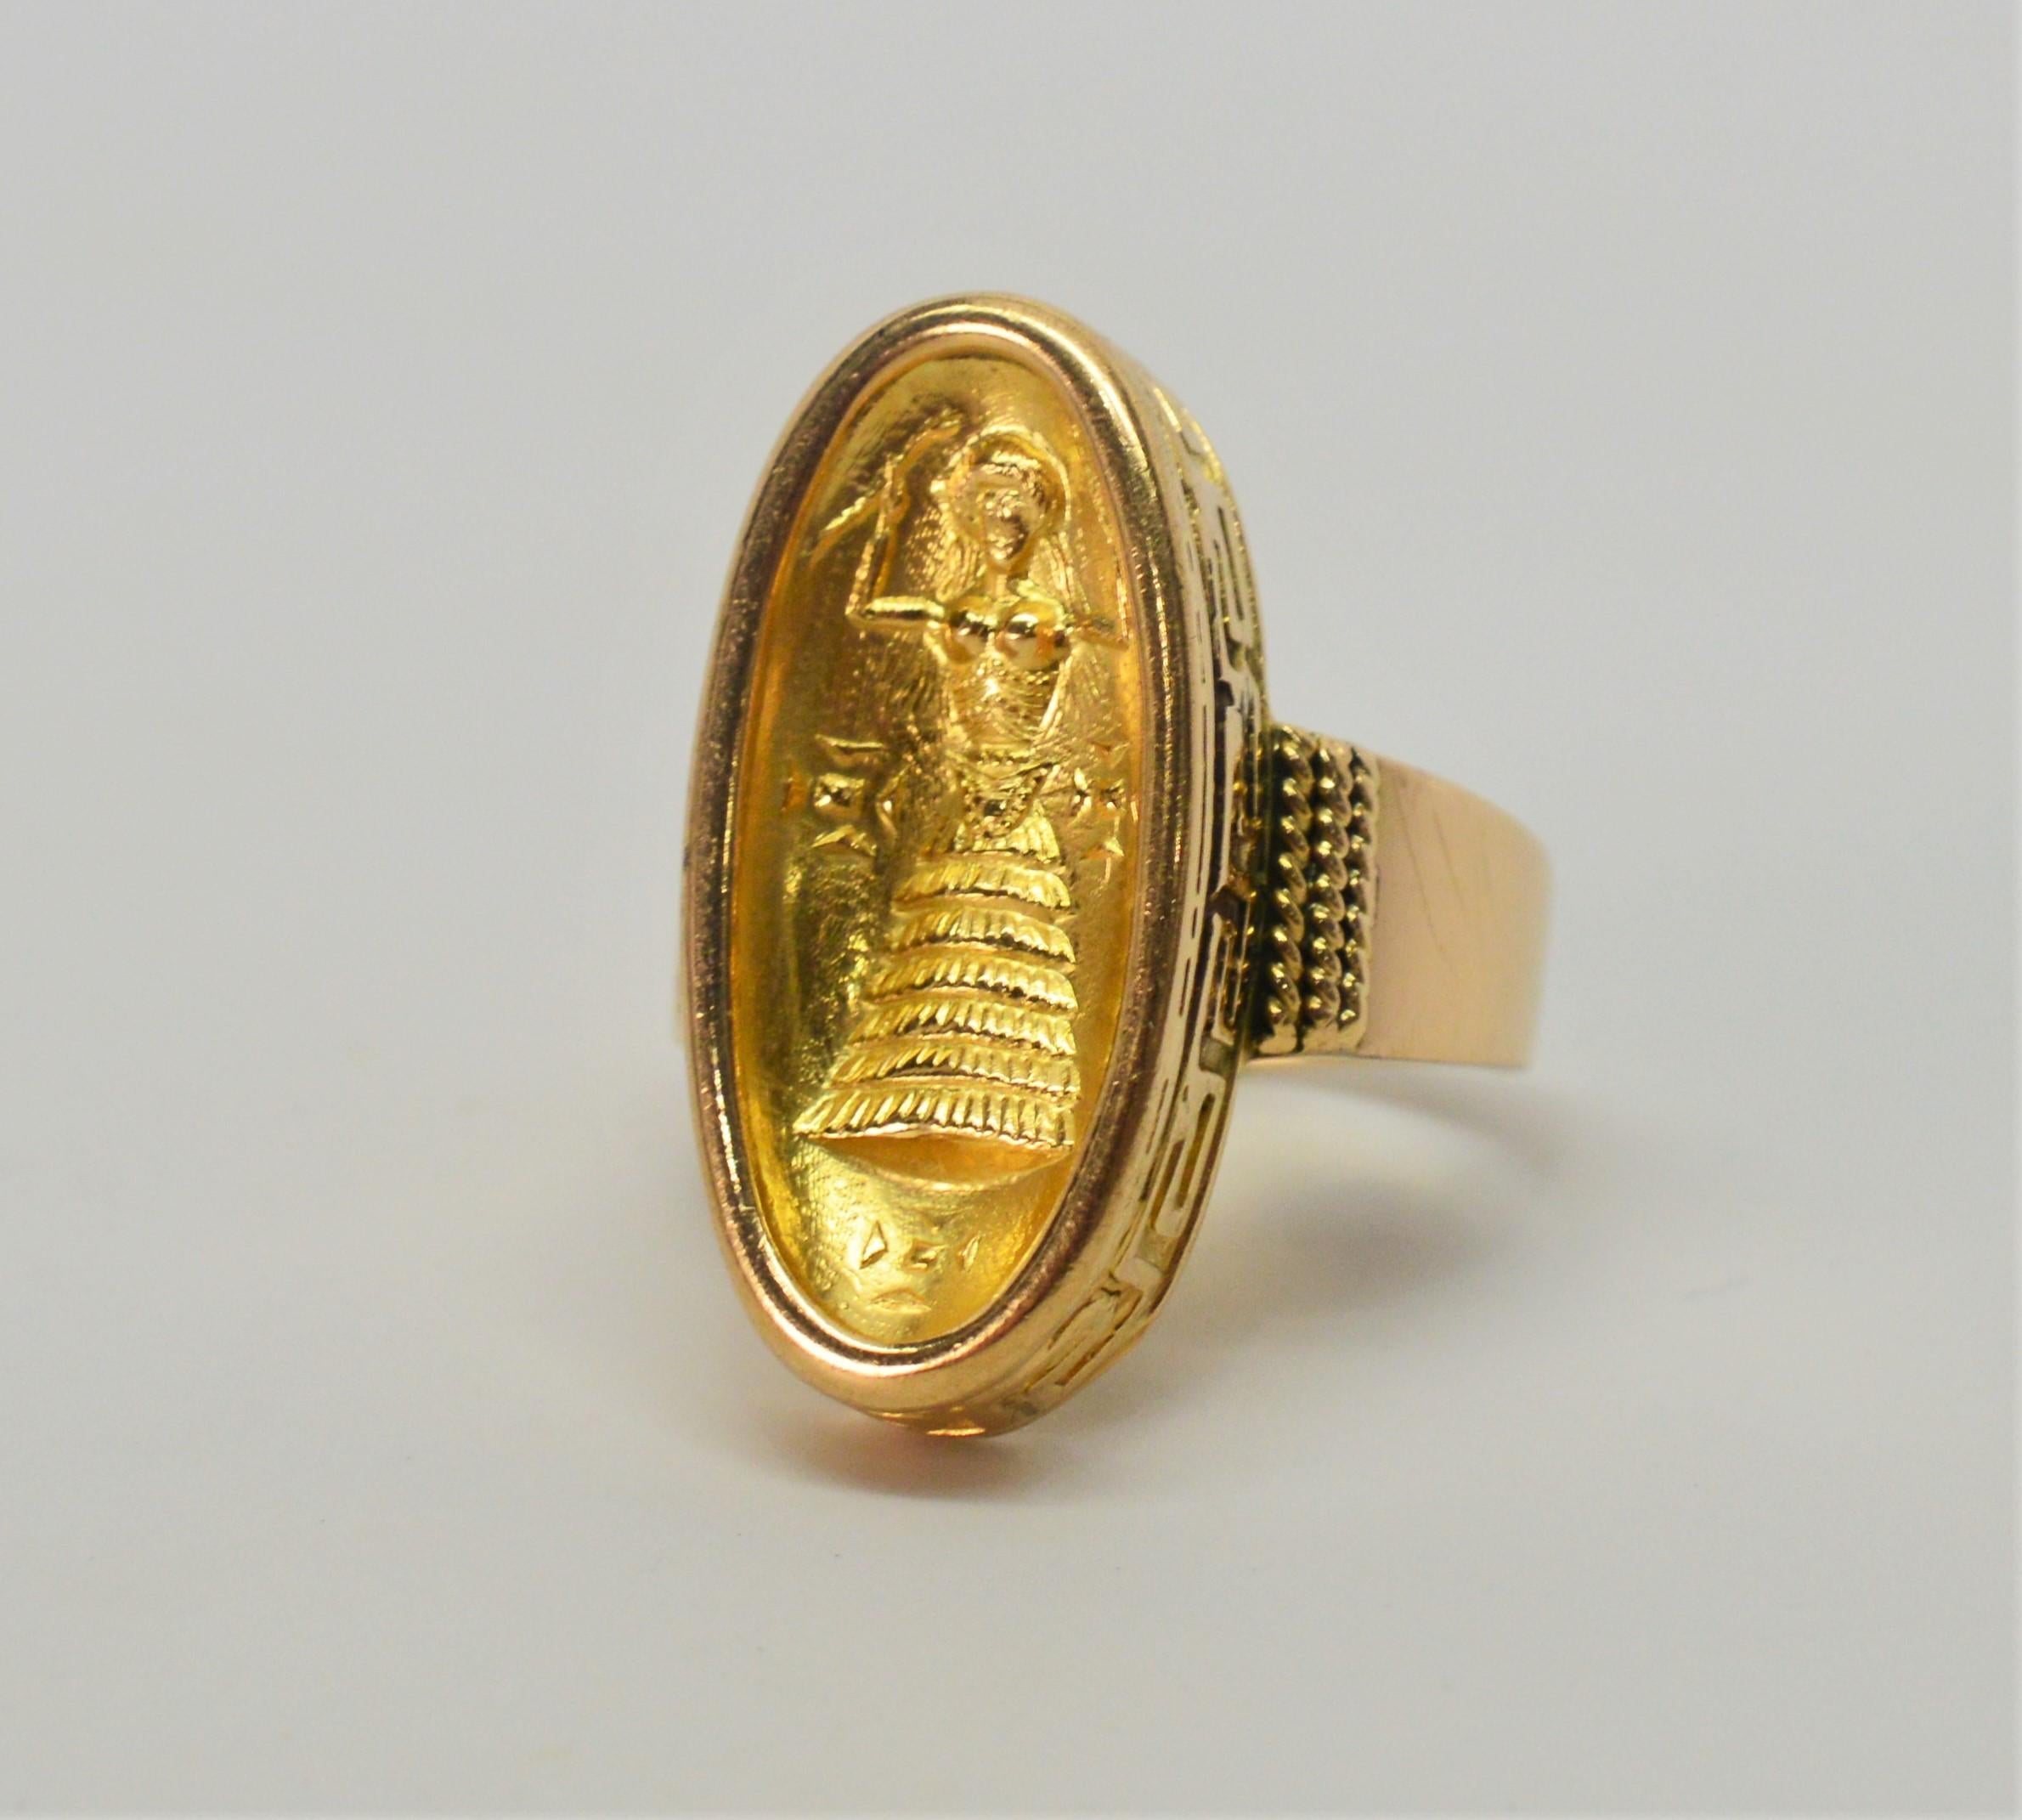 Feel empowered wearing this unique fourteen carat yellow gold exotic princess ring. She's a bold beauty, measuring 1 inch tall x 1/2 inch wide and 1/4 inch deep. In ring size 8-1/4 and can be resized by your jeweler.